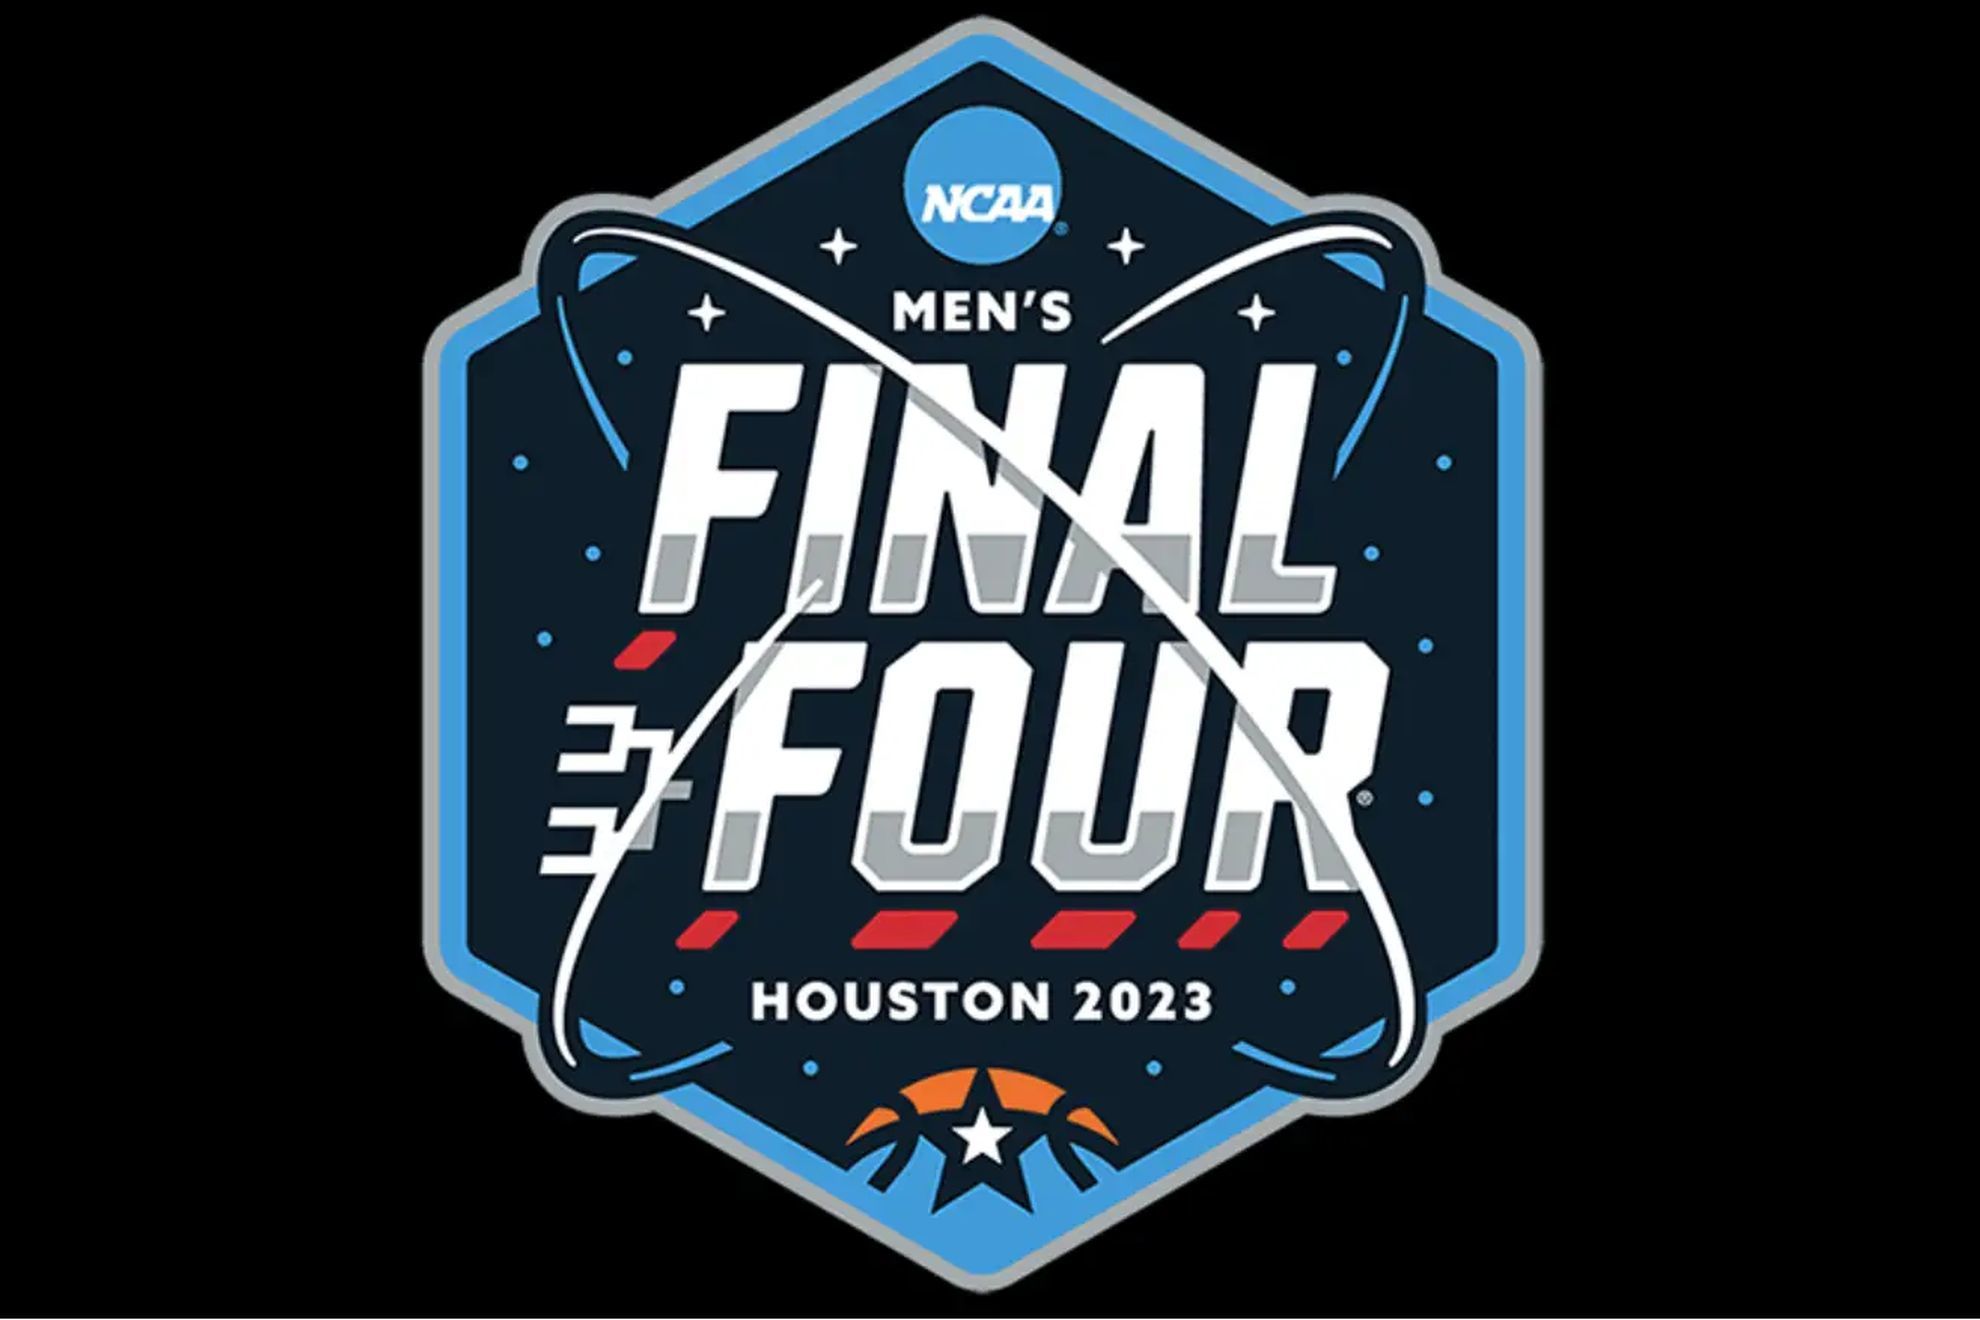 Final Four Schedule: What channel will the Men's Final Four be on?